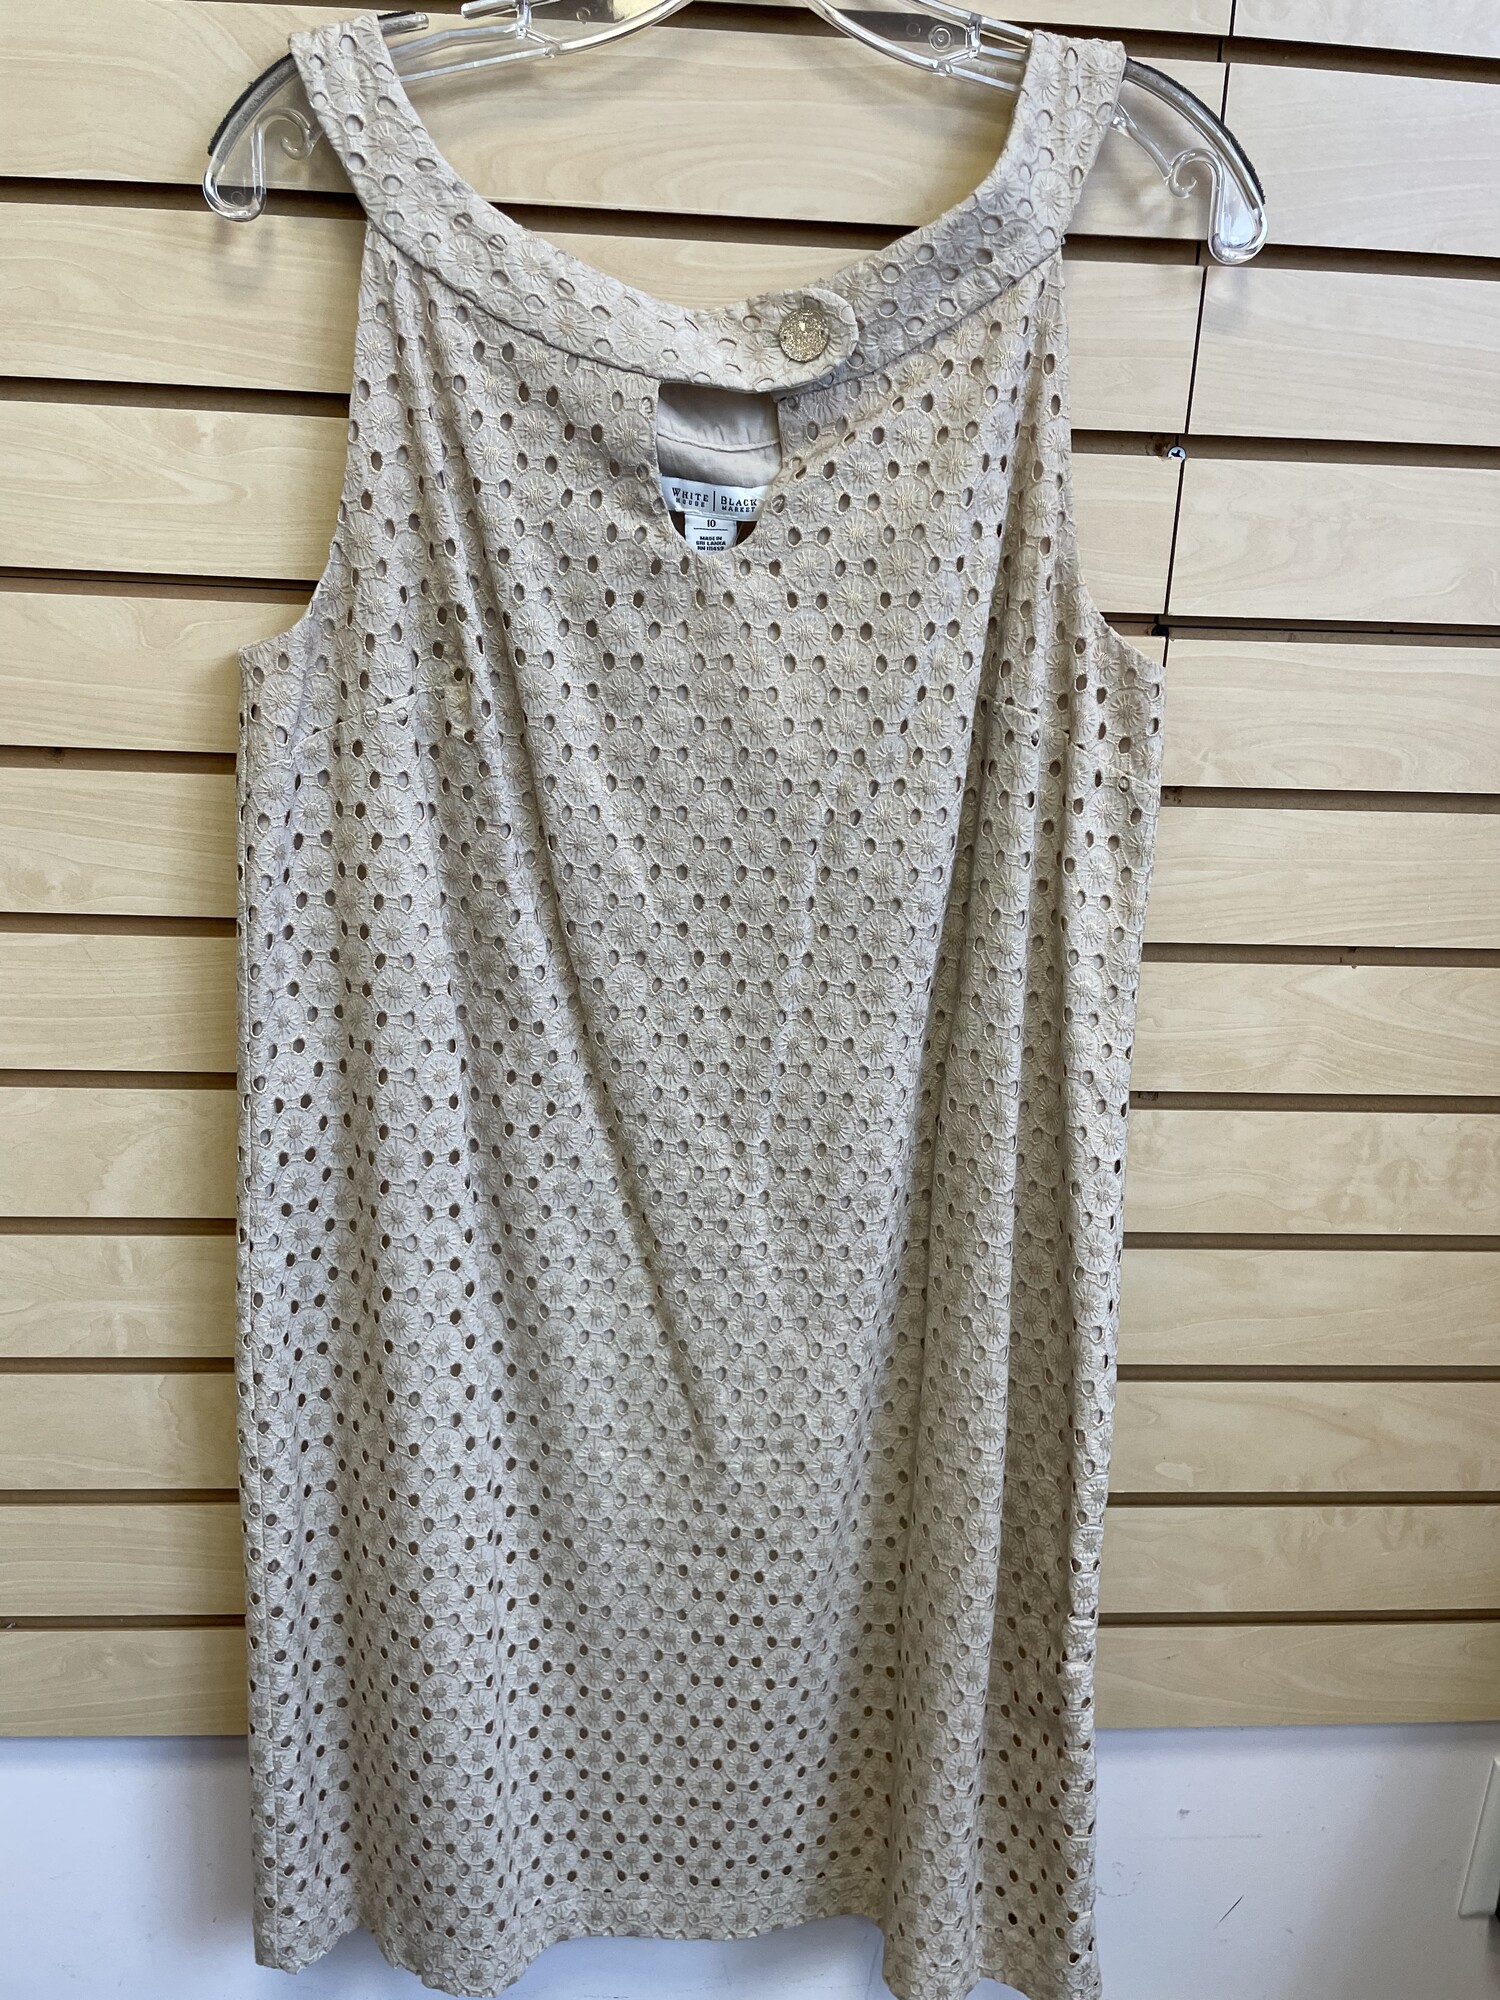 WHBM Tank Dress, Khaki/Beige,  Floral Eyelet Outer Layer, Button Closure at the Neckline with a Keyhole Opening in the Front, Size: Medium